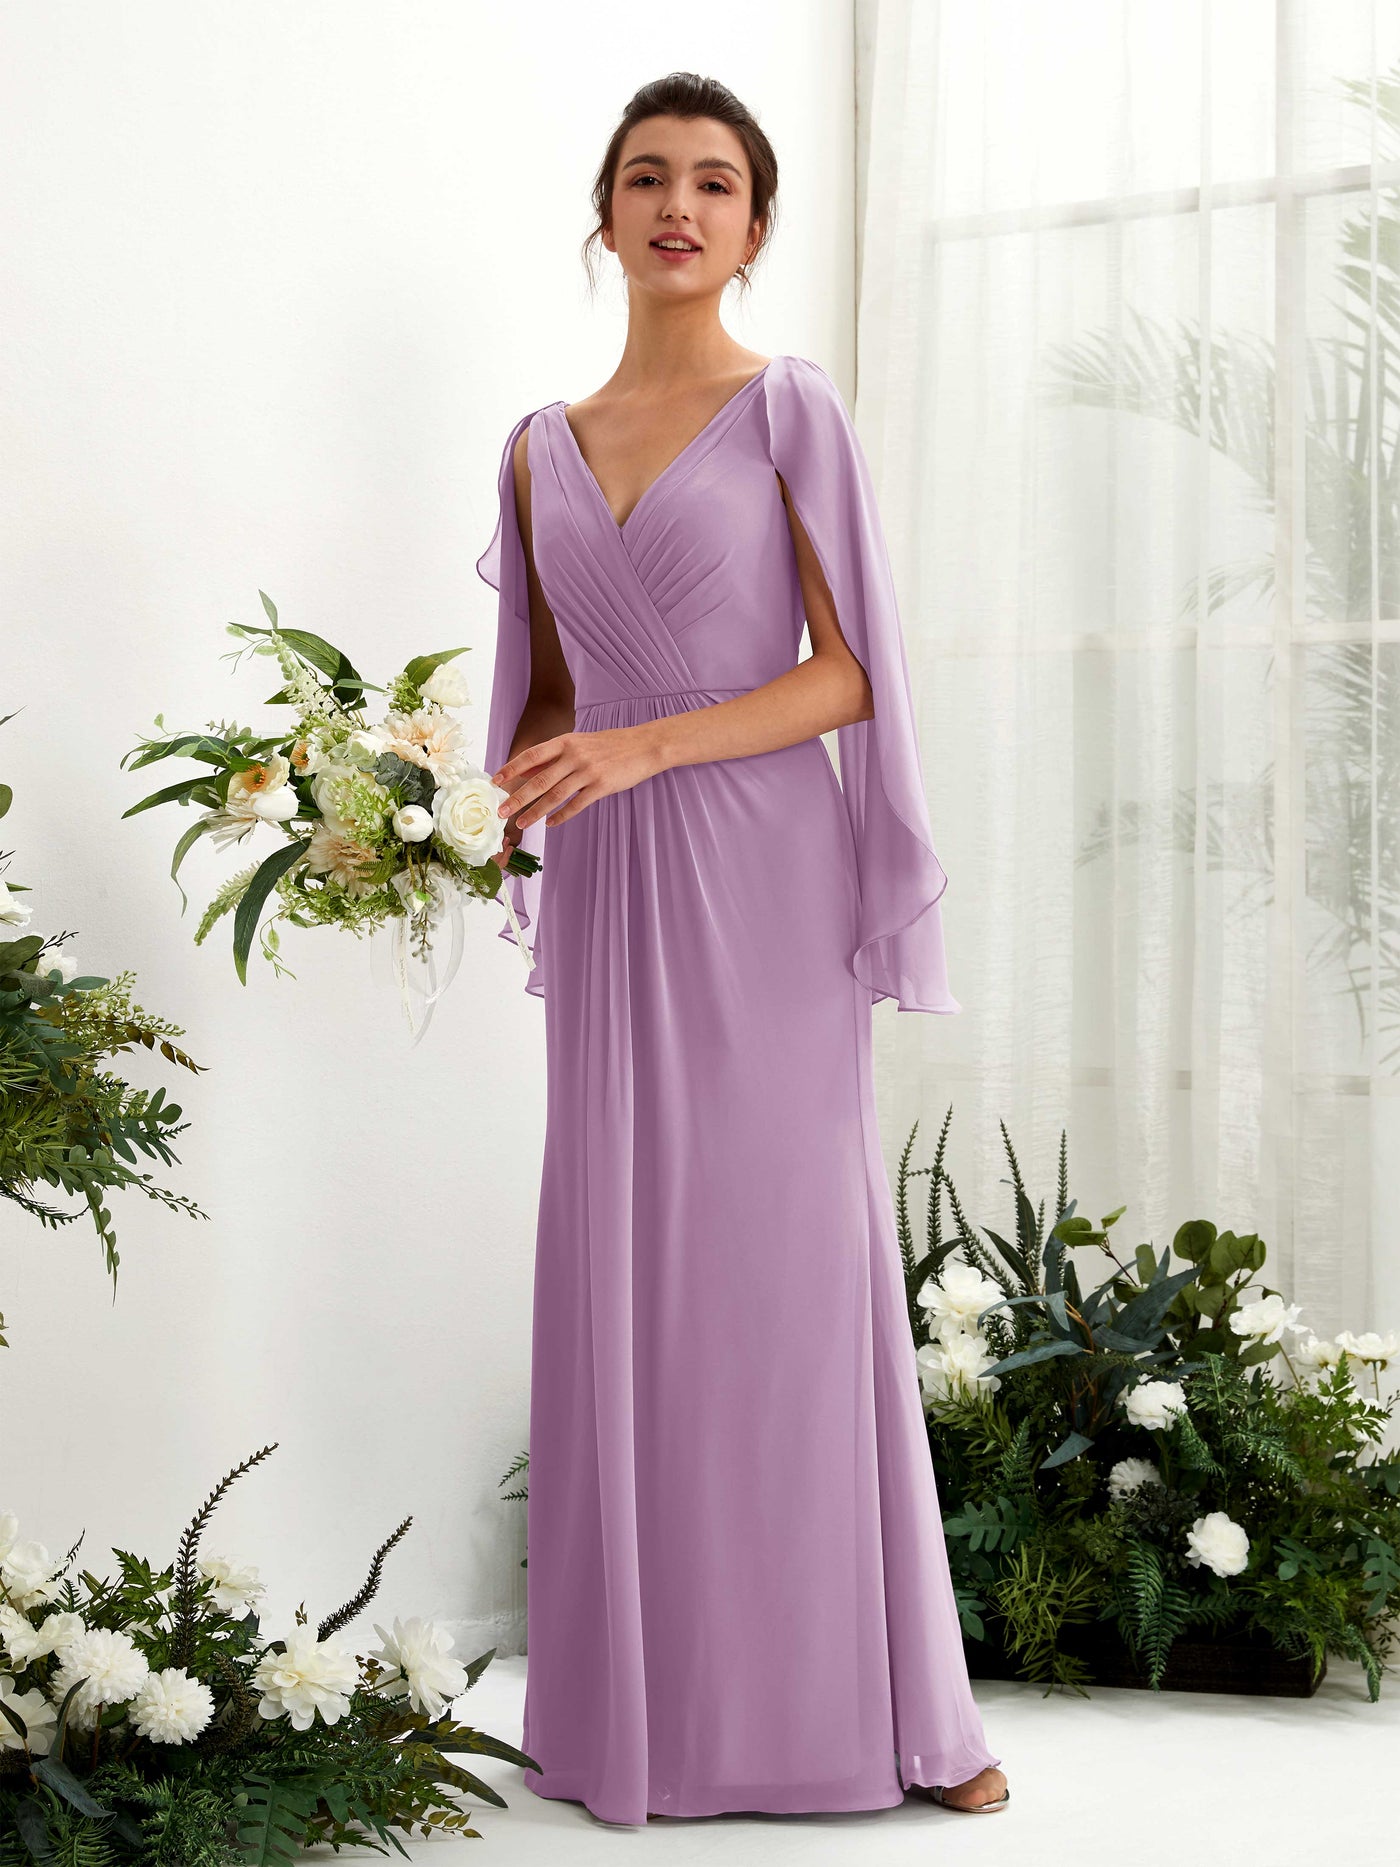 Orchid Mist Bridesmaid Dresses Bridesmaid Dress A-line Chiffon Straps Full Length Long Sleeves Wedding Party Dress (80220121)#color_orchid-mist